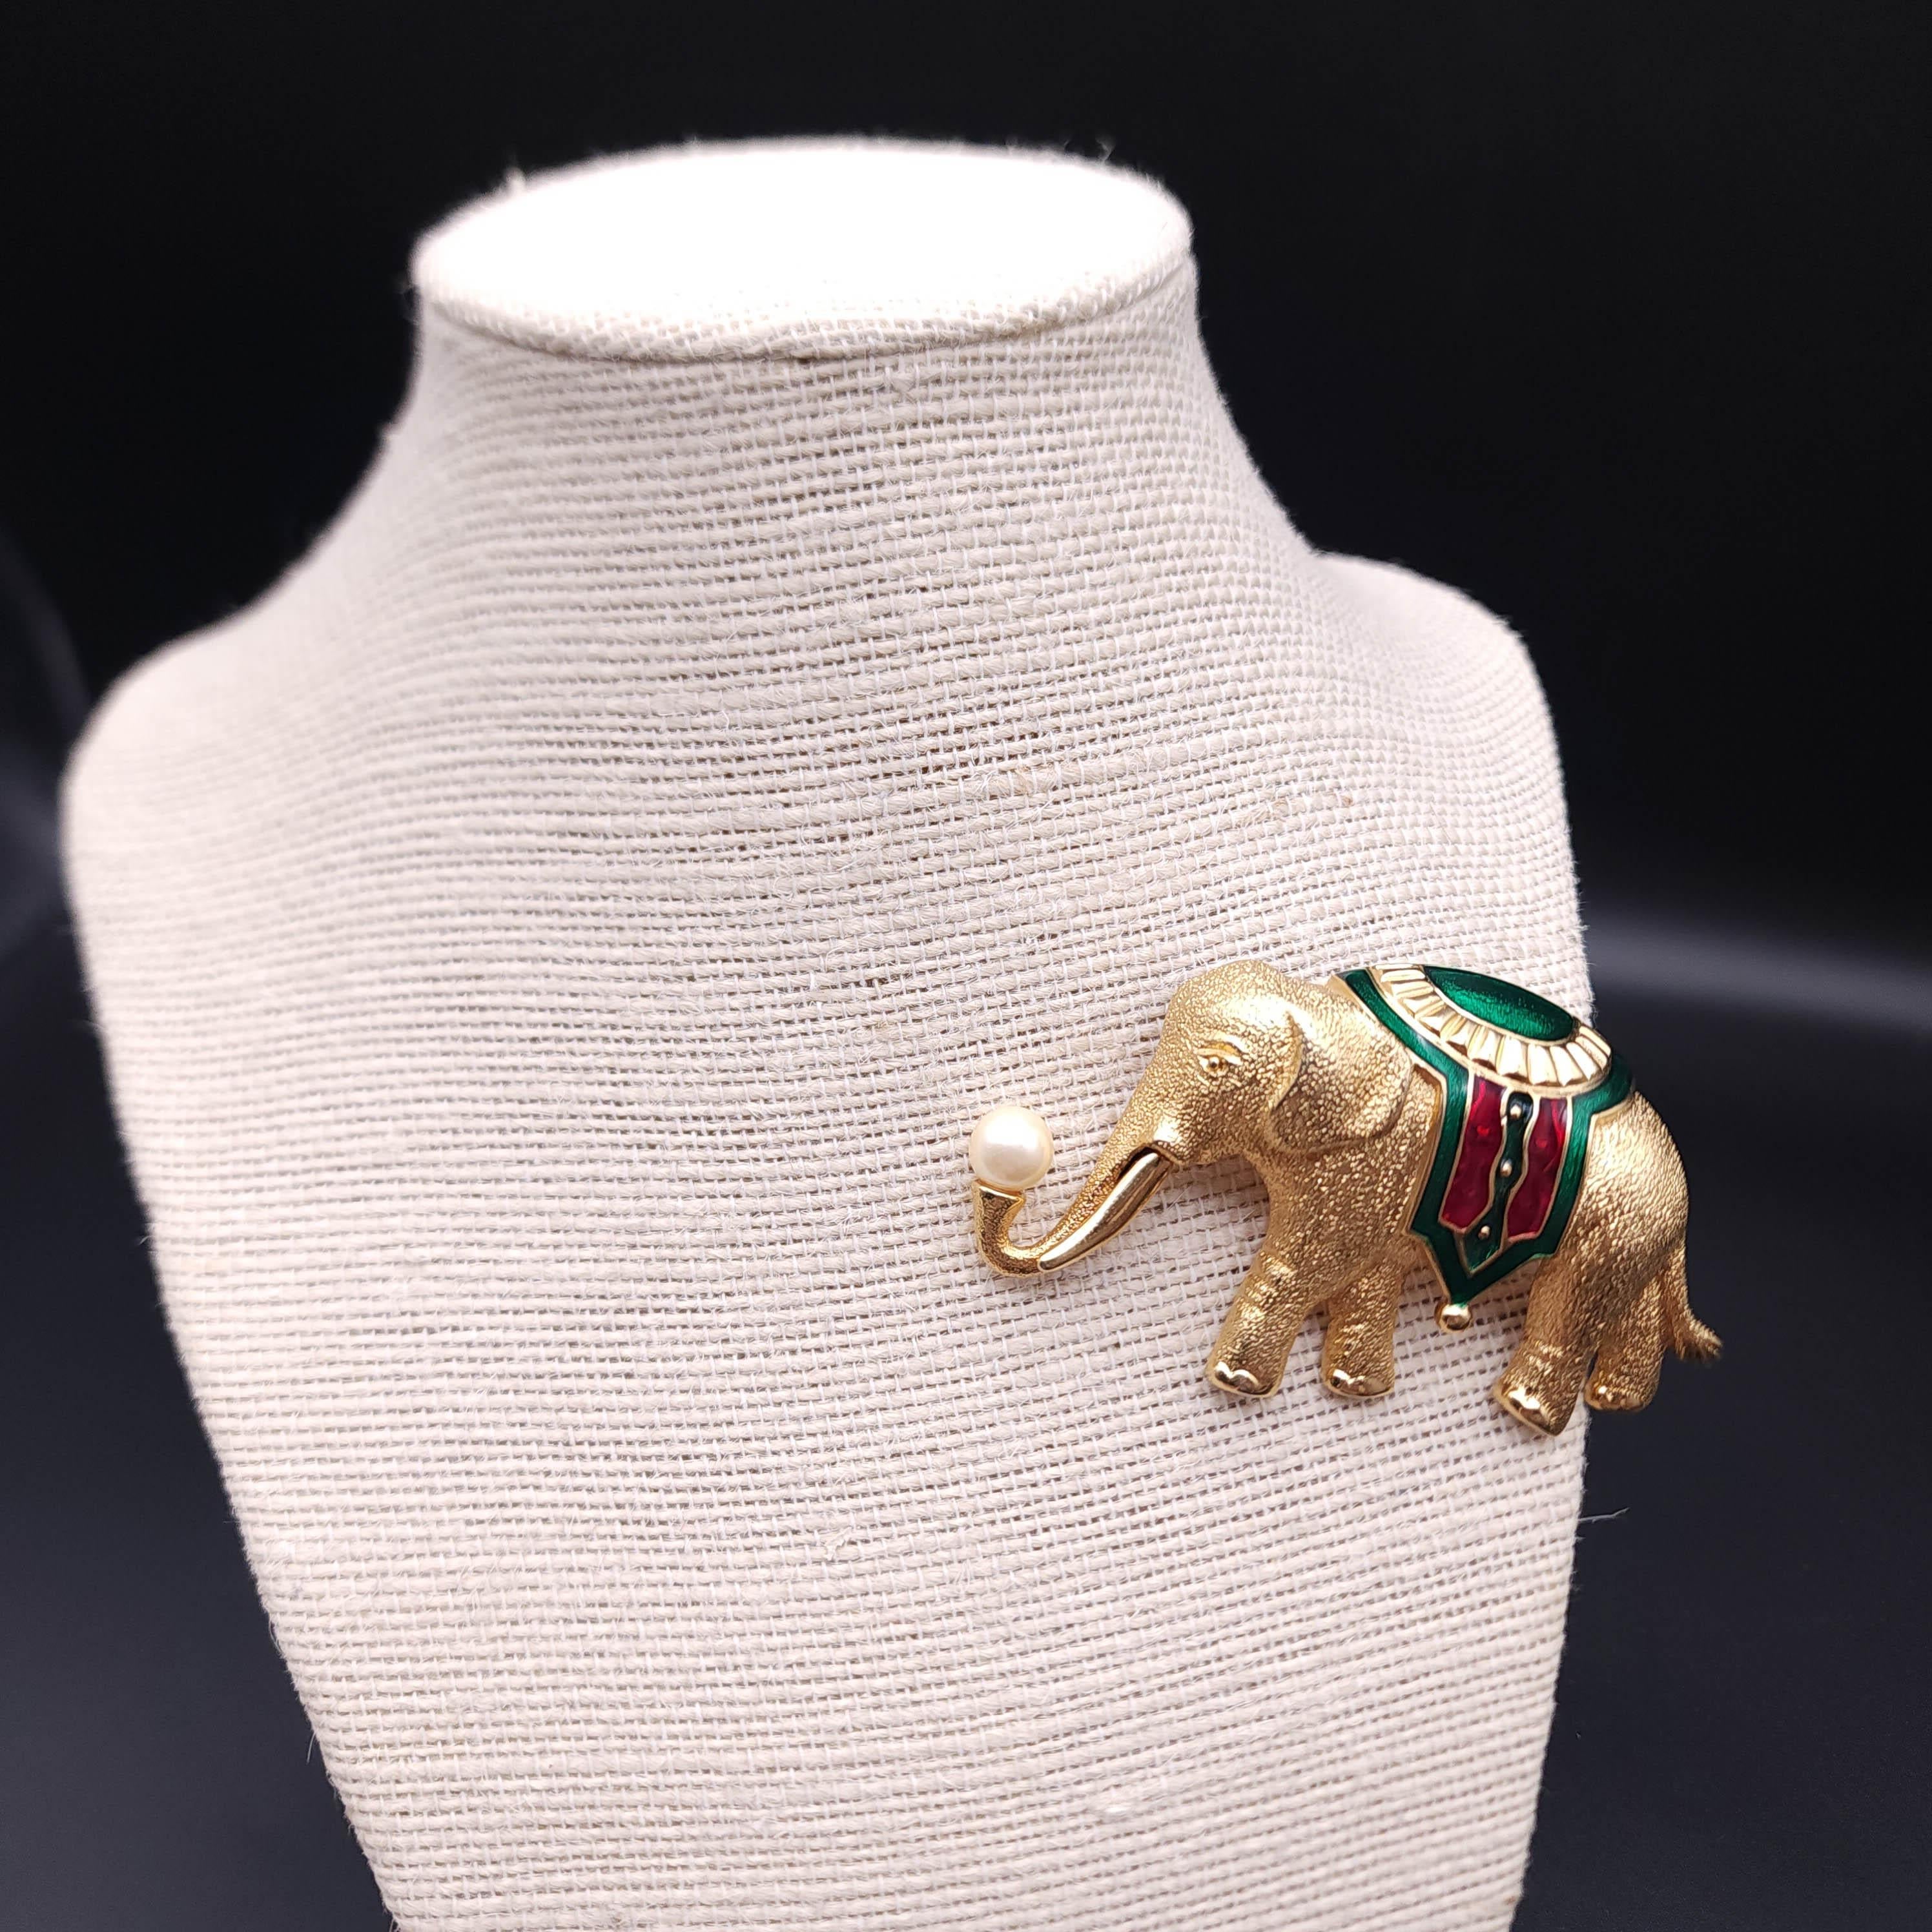 3 x 1.5 inches

Embrace the timeless charm of vintage jewelry with this exquisite Monet elephant pin. Crafted with a lustrous gold-filled metal setting, this piece captures the majestic beauty of an elephant in mid-stride. A symbol of wisdom and